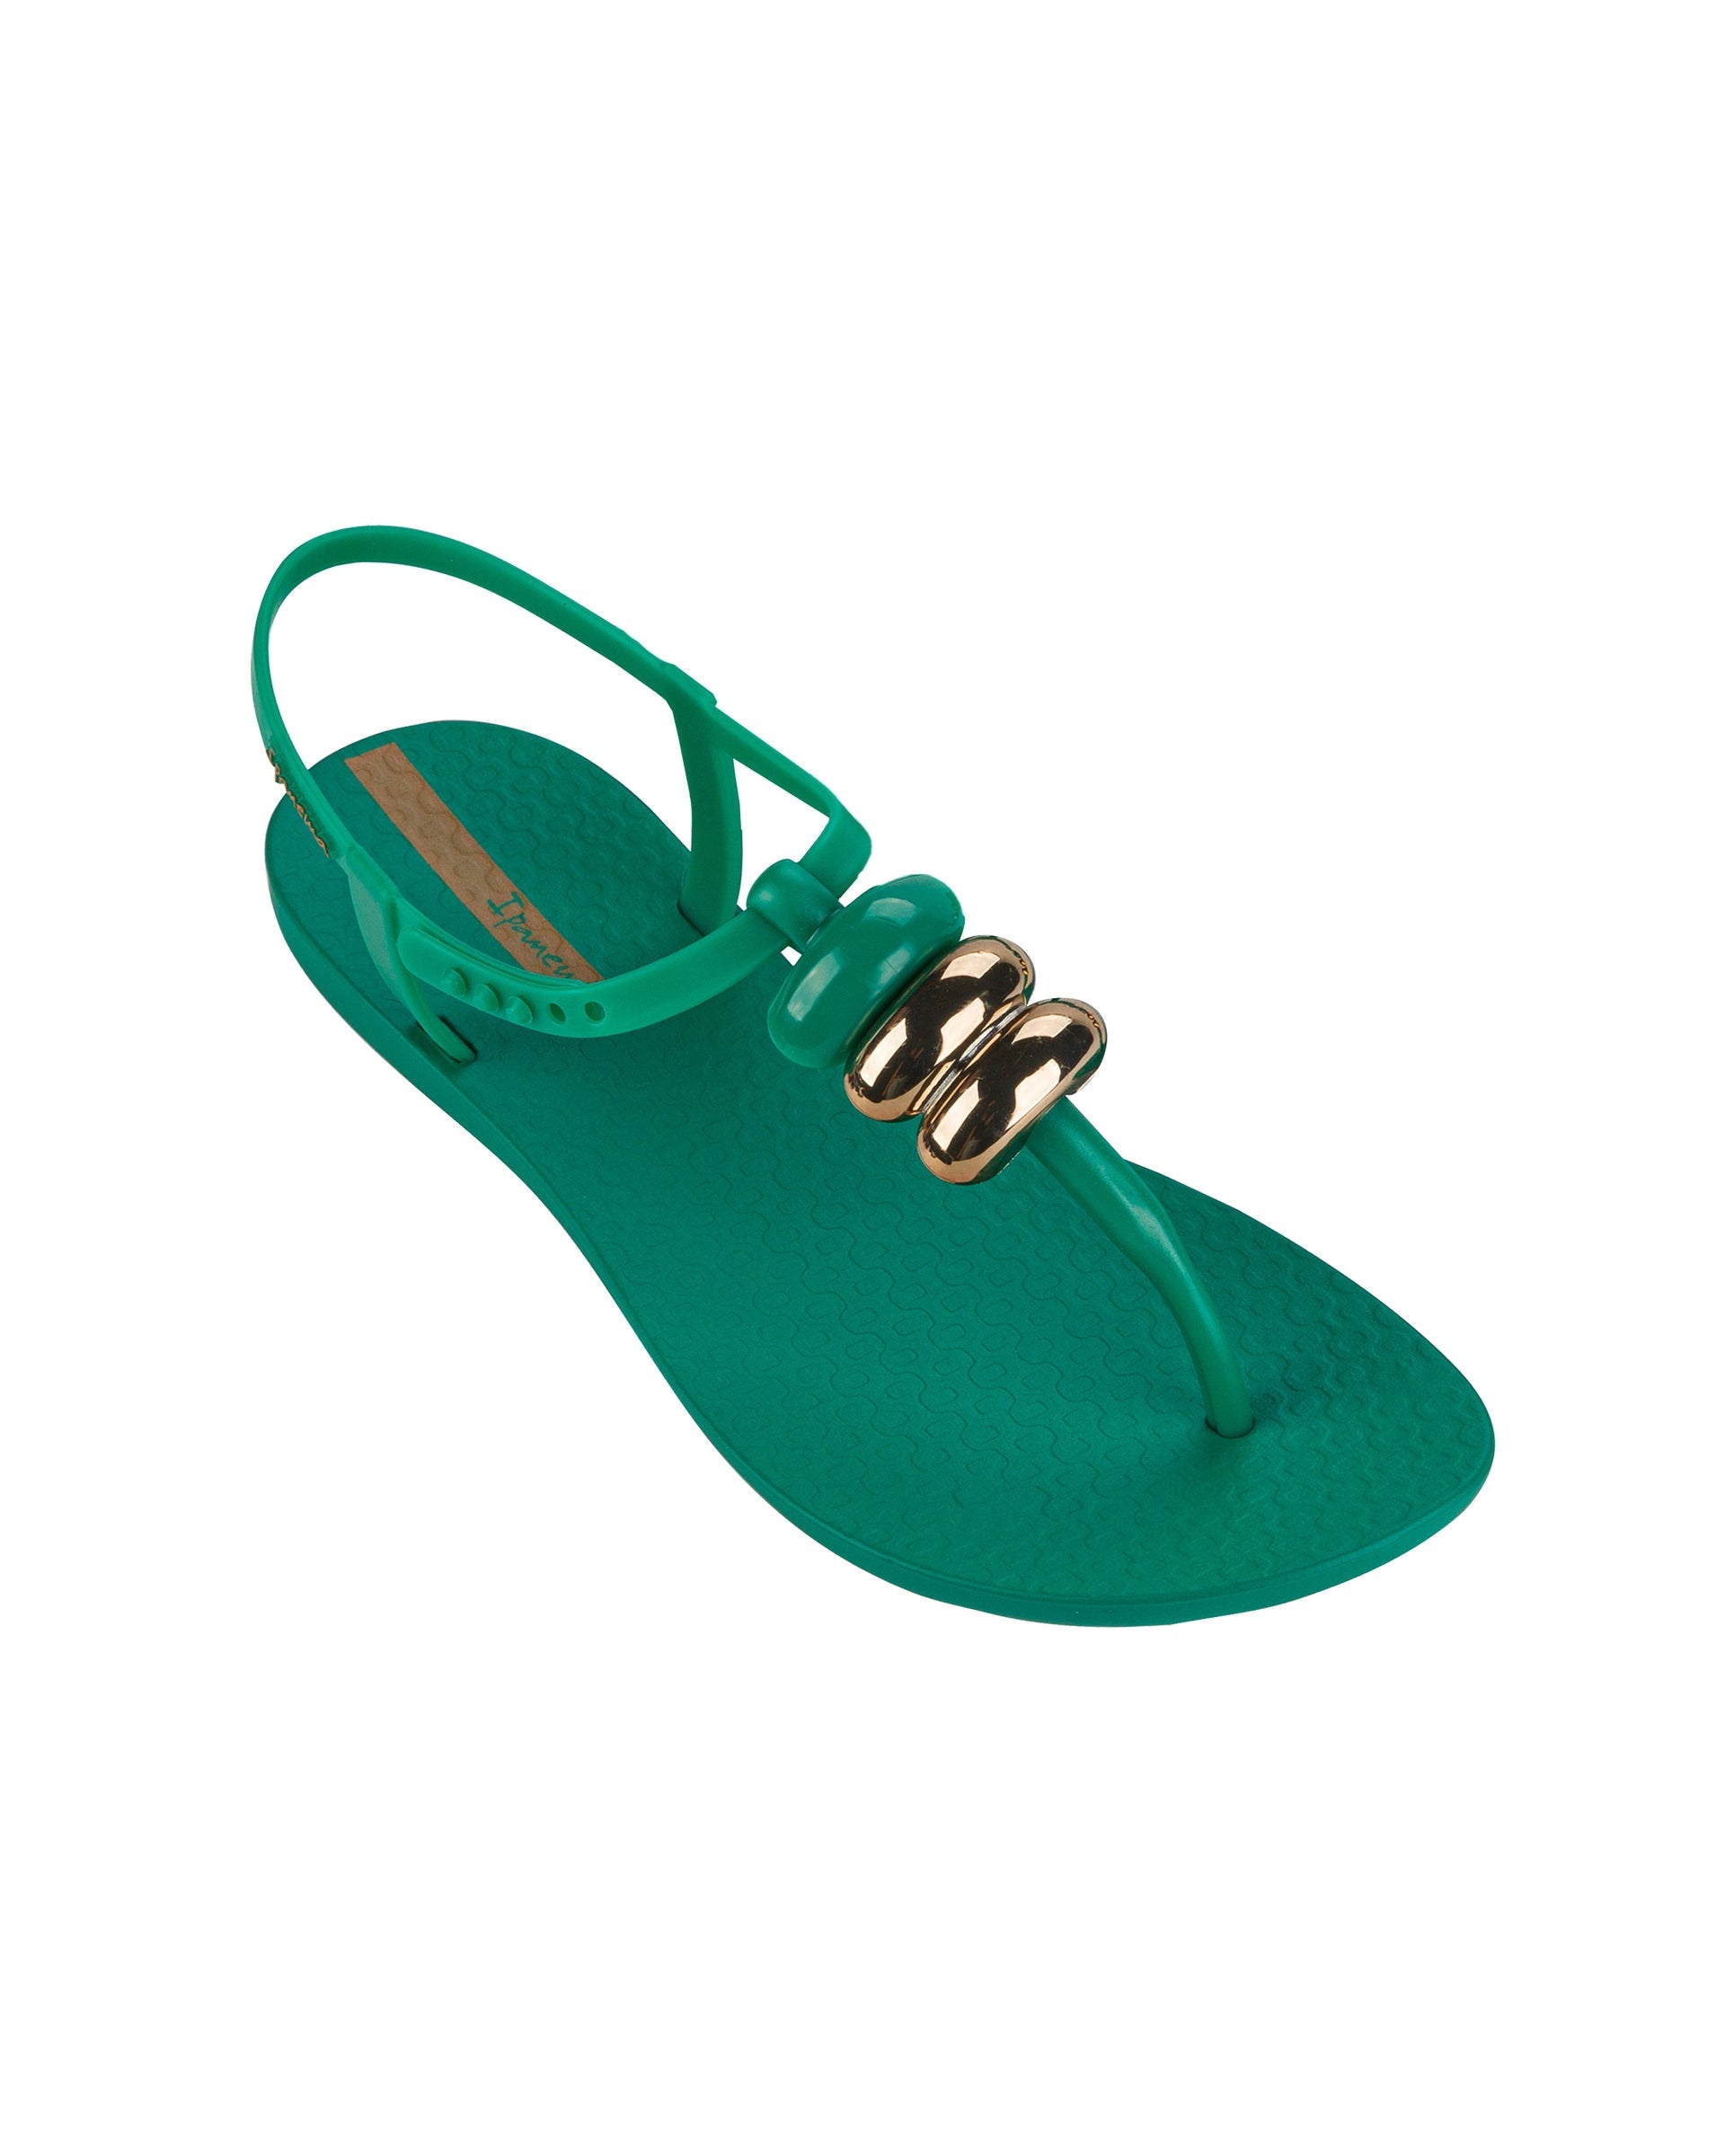 Angled view of a green Ipanema Class women's sandal with 3 bubble baubles on the t-strap.